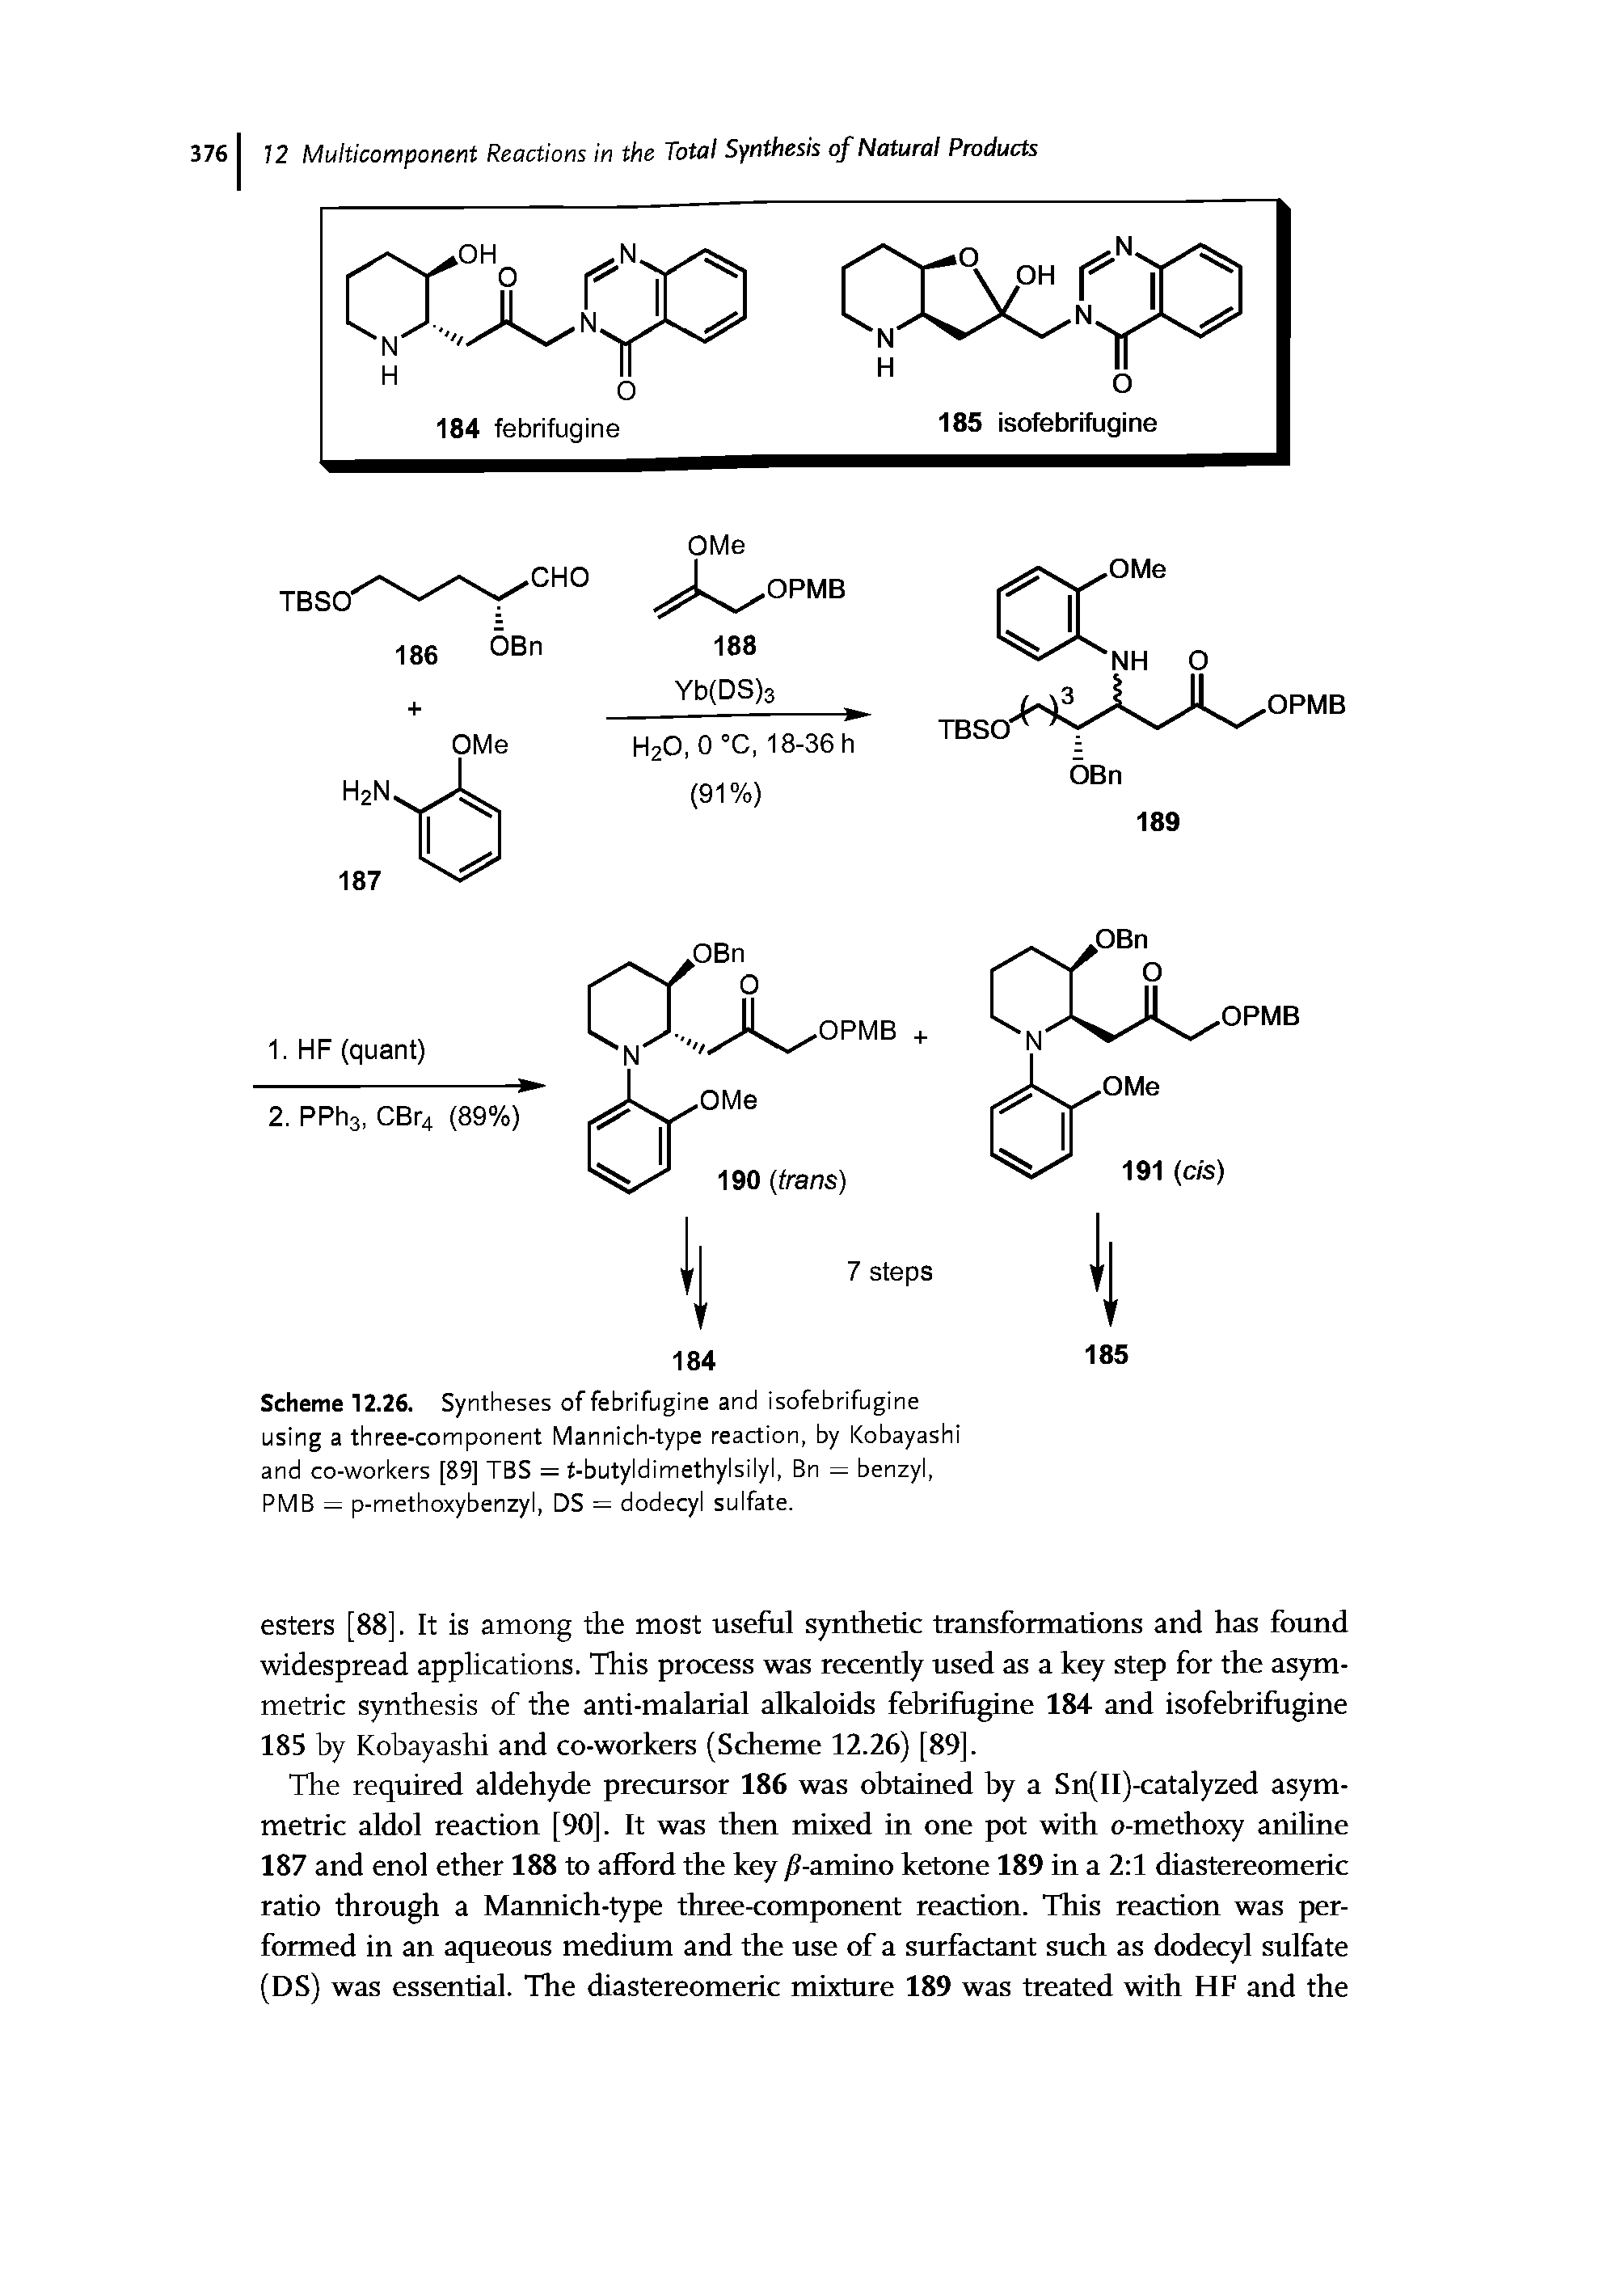 Scheme 12.26. Syntheses offebrifugine and isofebrifugine using a three-component Mannich-type reaction, by Kobayashi and co-workers [89] TBS = t-butyldi methyl si ly I, Bn = benzyl,...